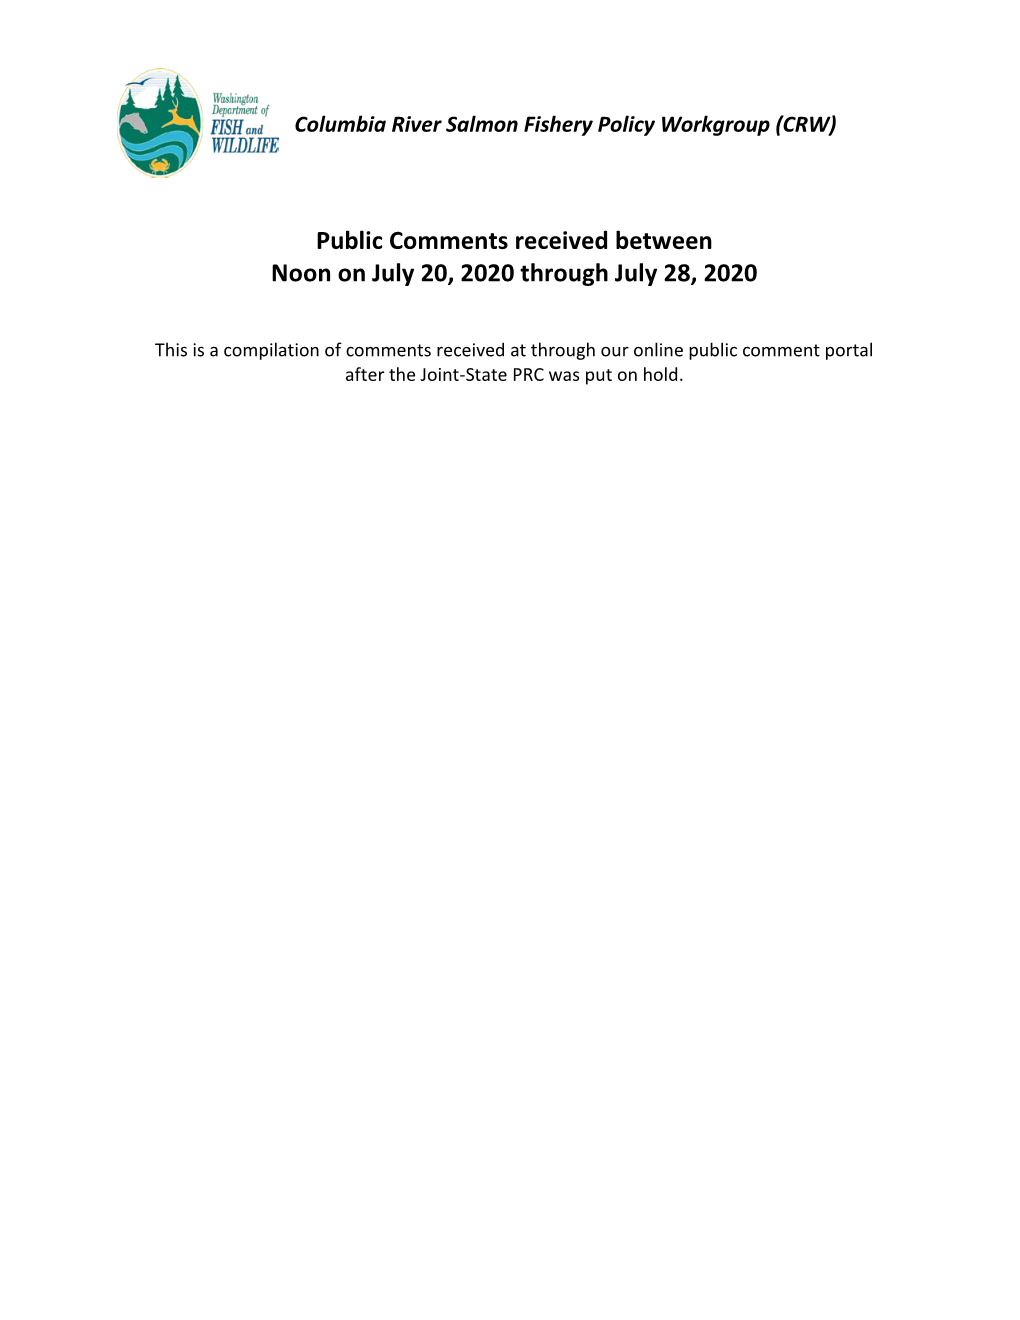 Public Comment Received from Noon on July 20, 2020 Through